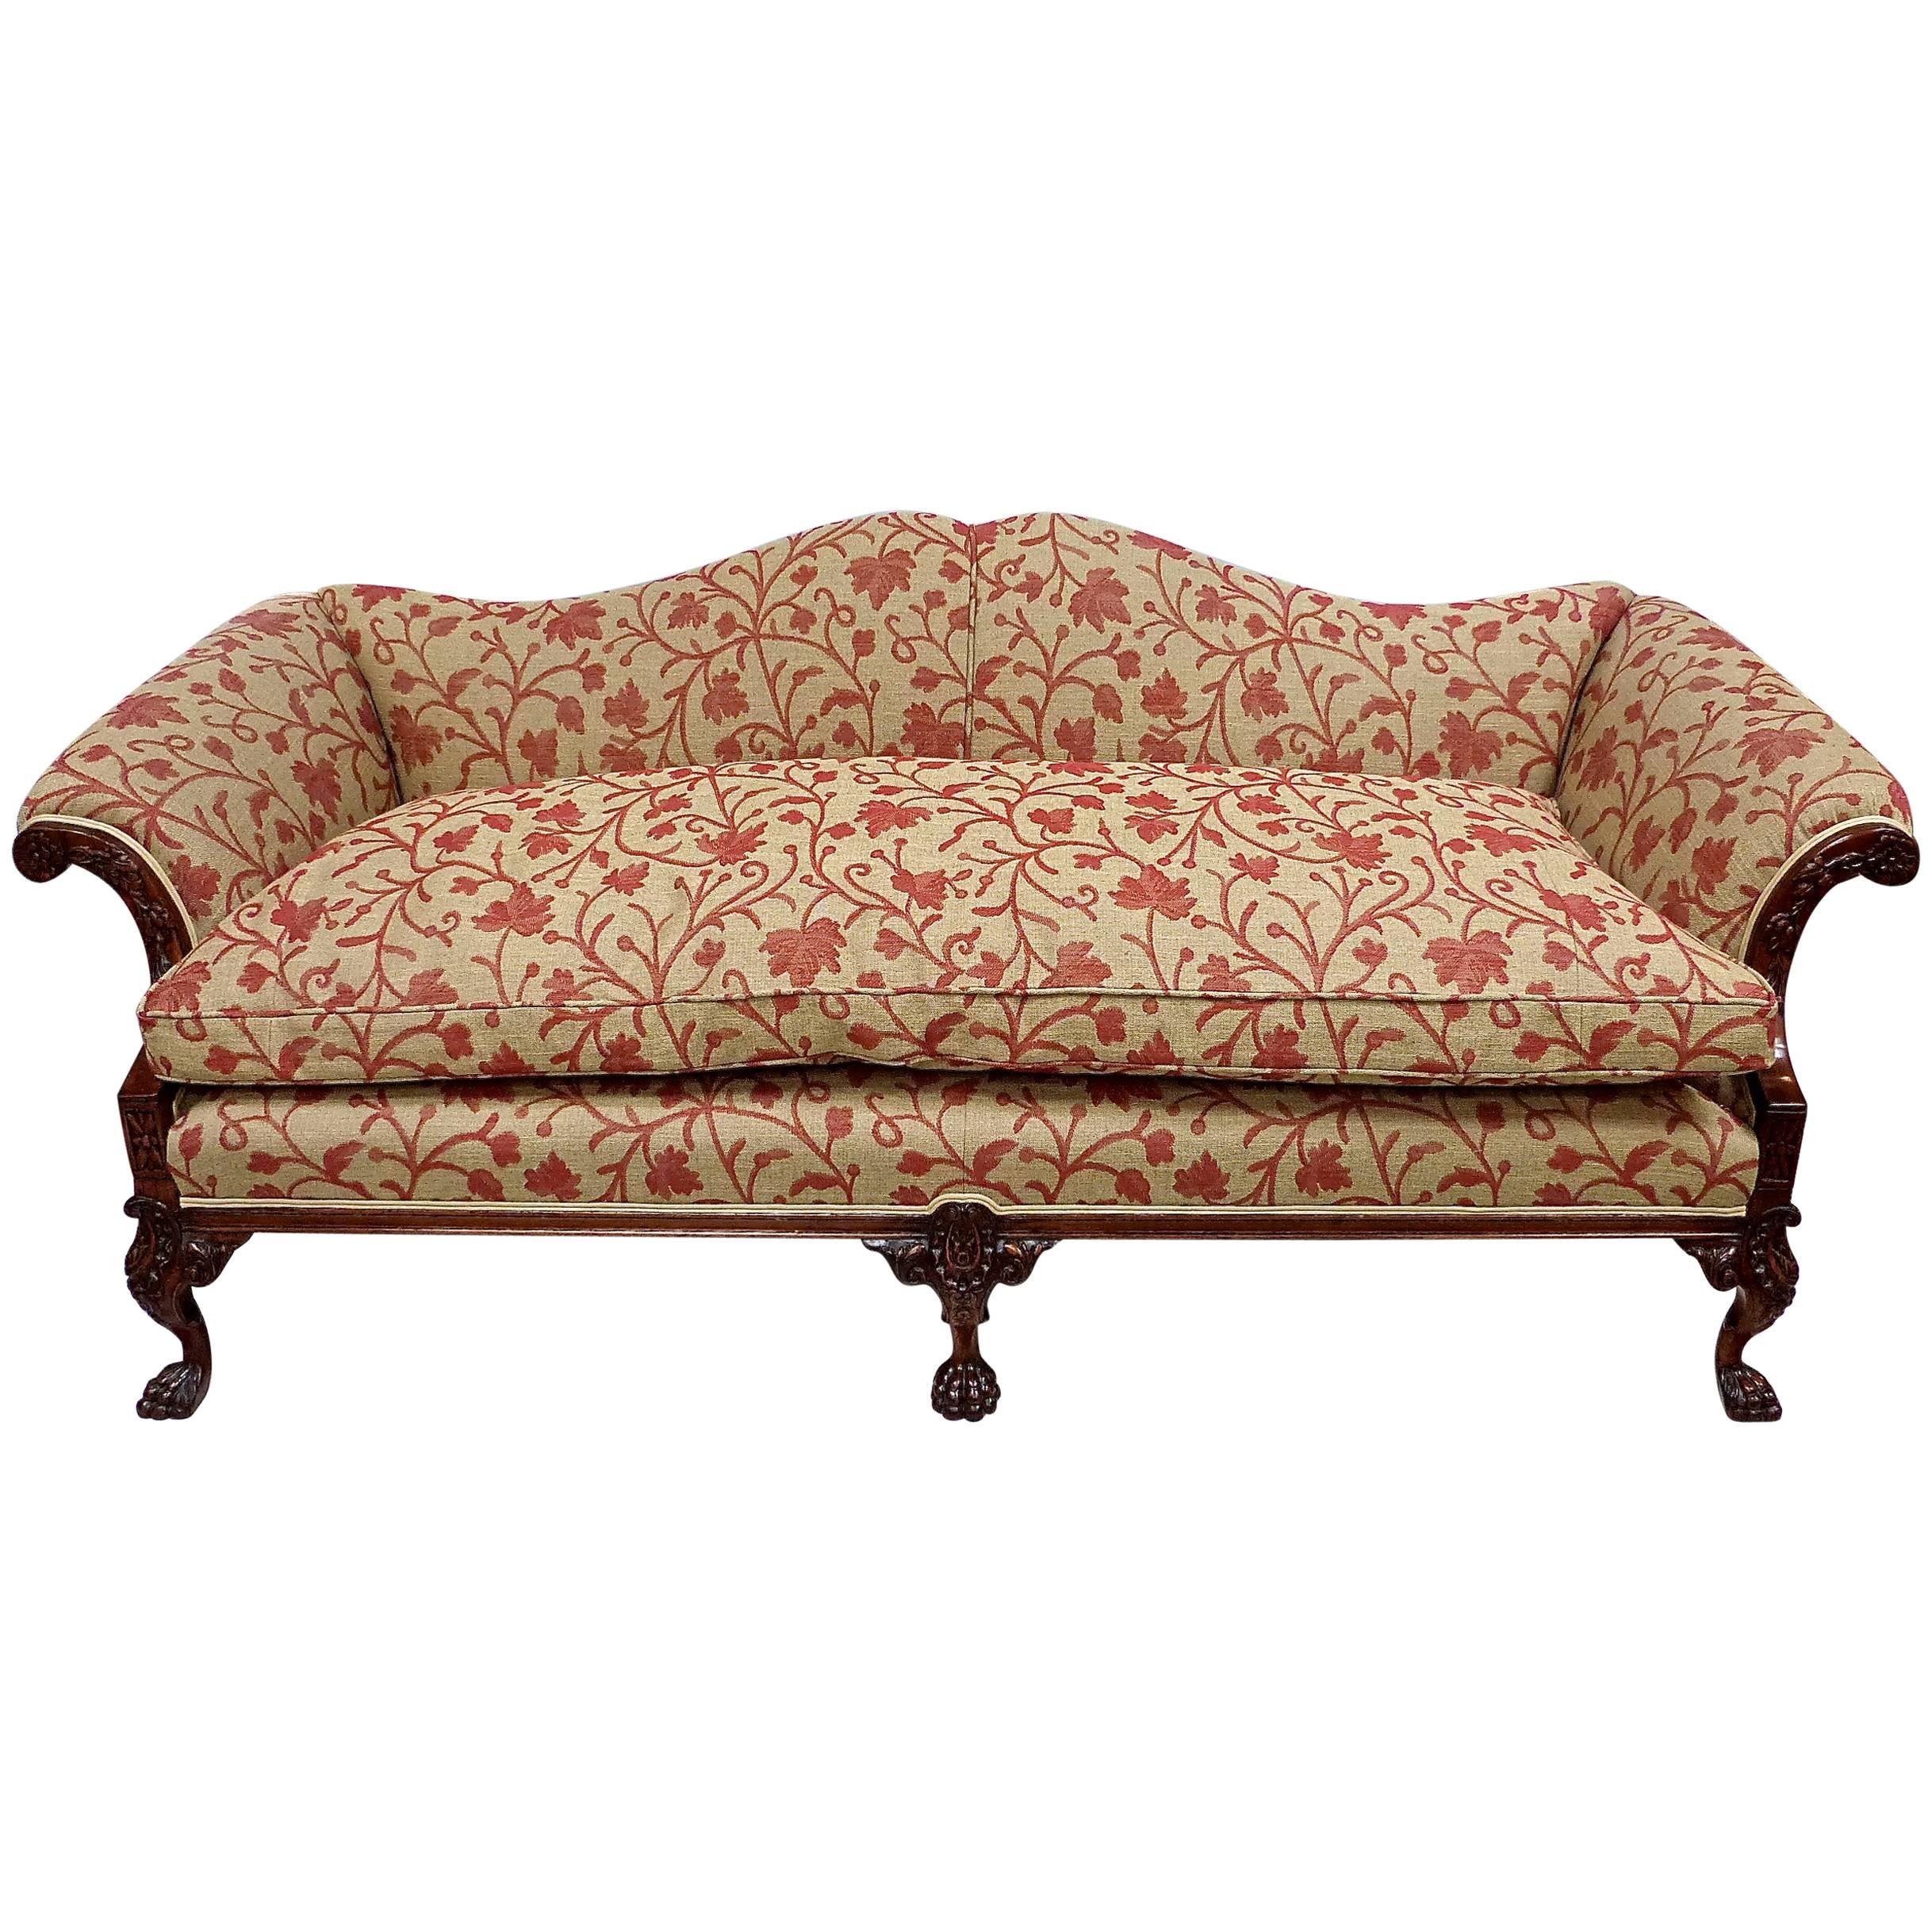 George III Style Camel Back Sofa For Sale